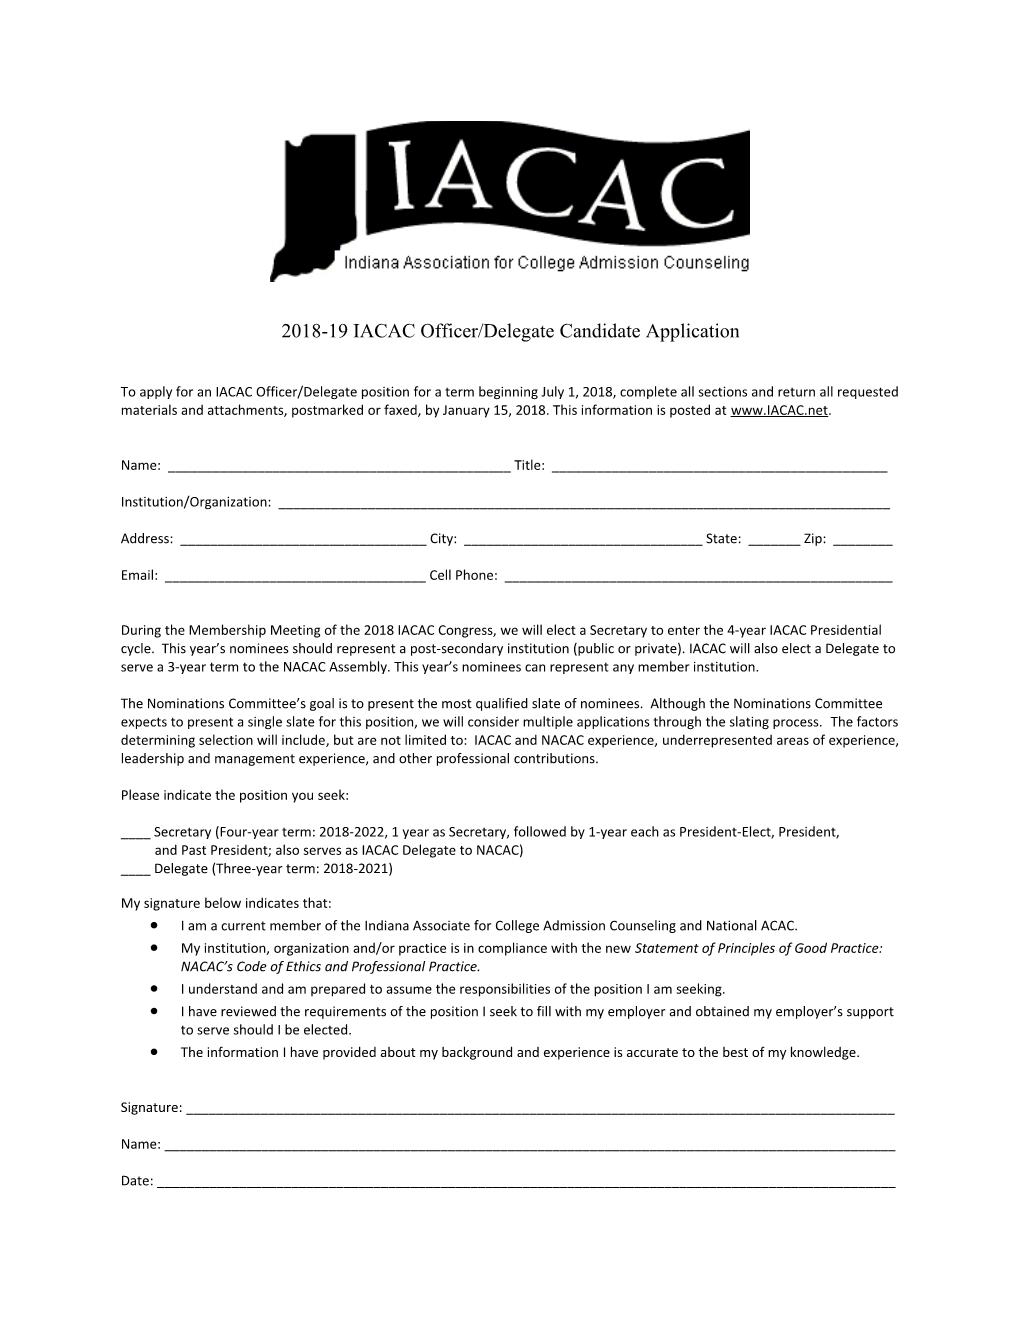 2018-19 IACAC Officer/Delegate Candidate Application